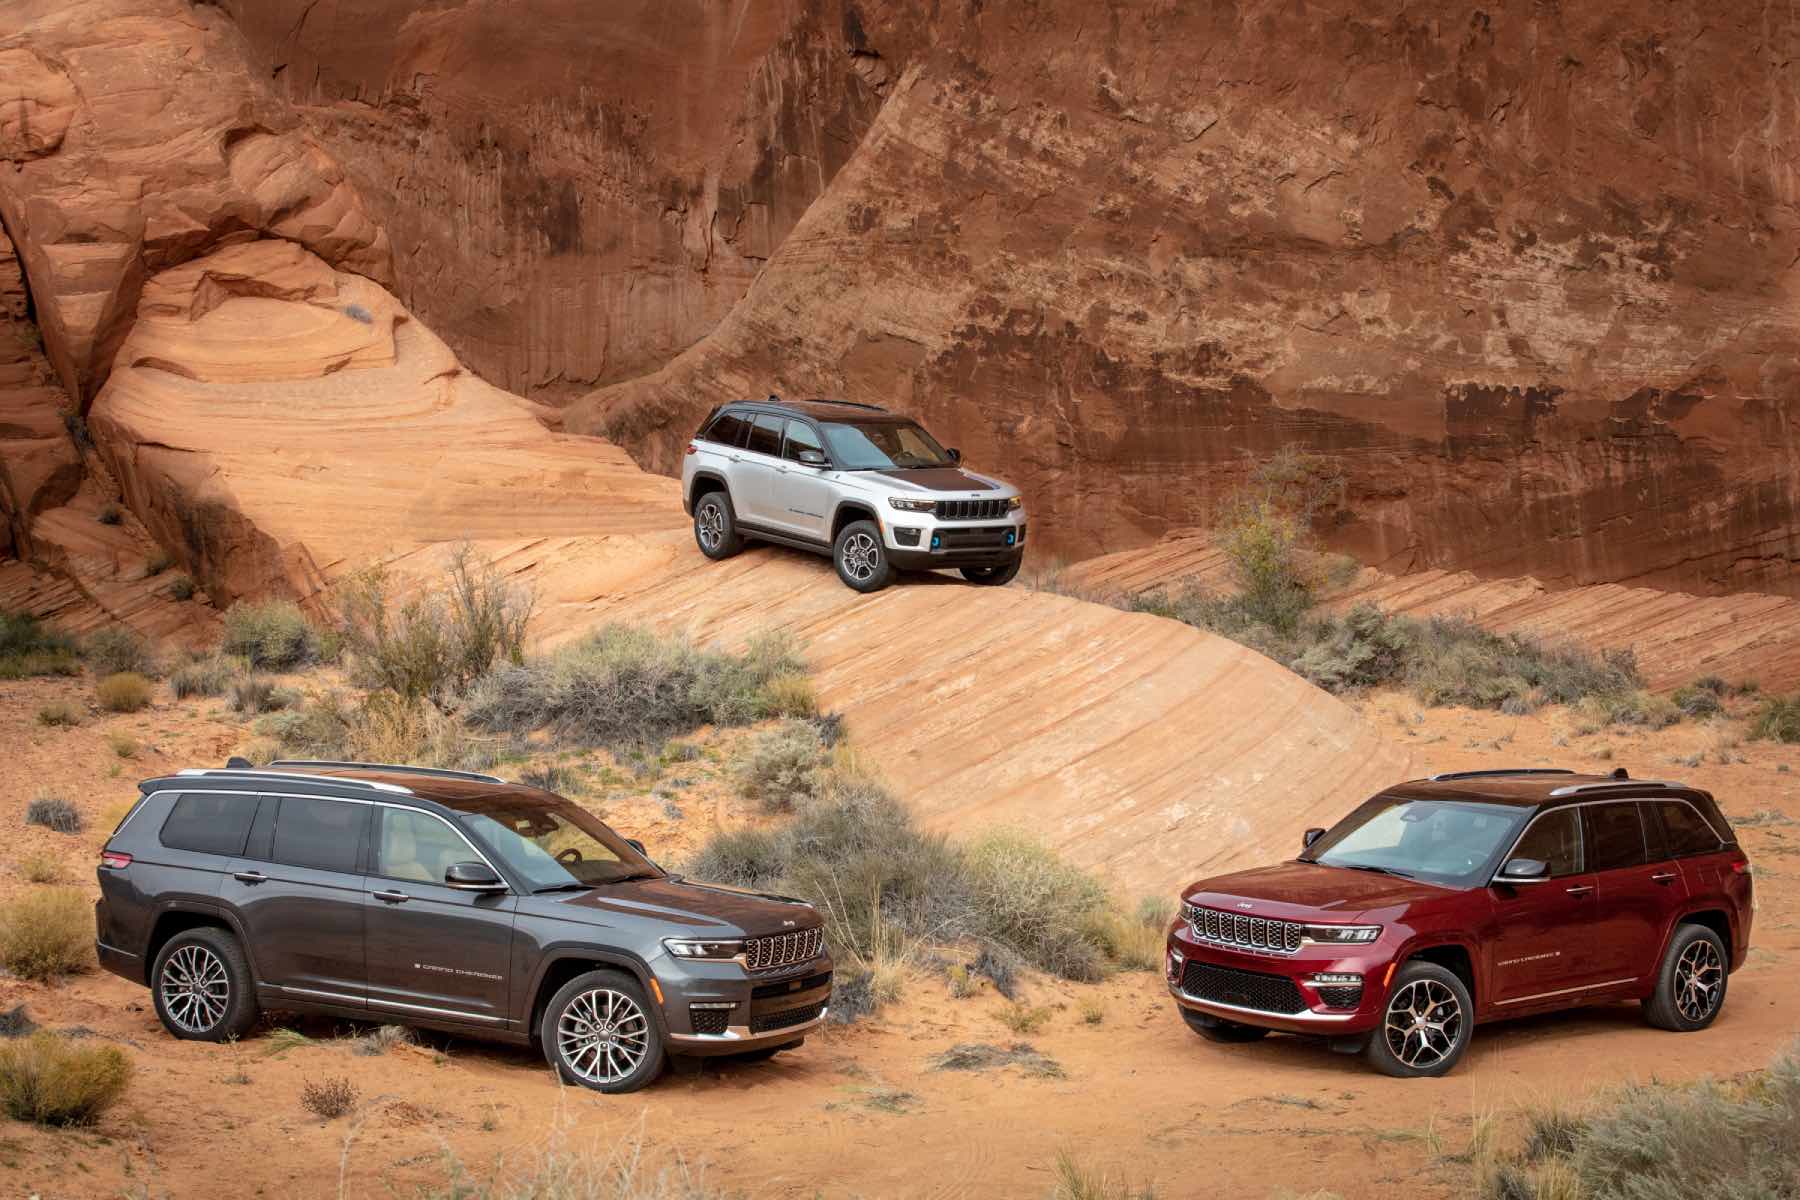 Three different Jeep Grand Cherokee models sit amid red rock formations.